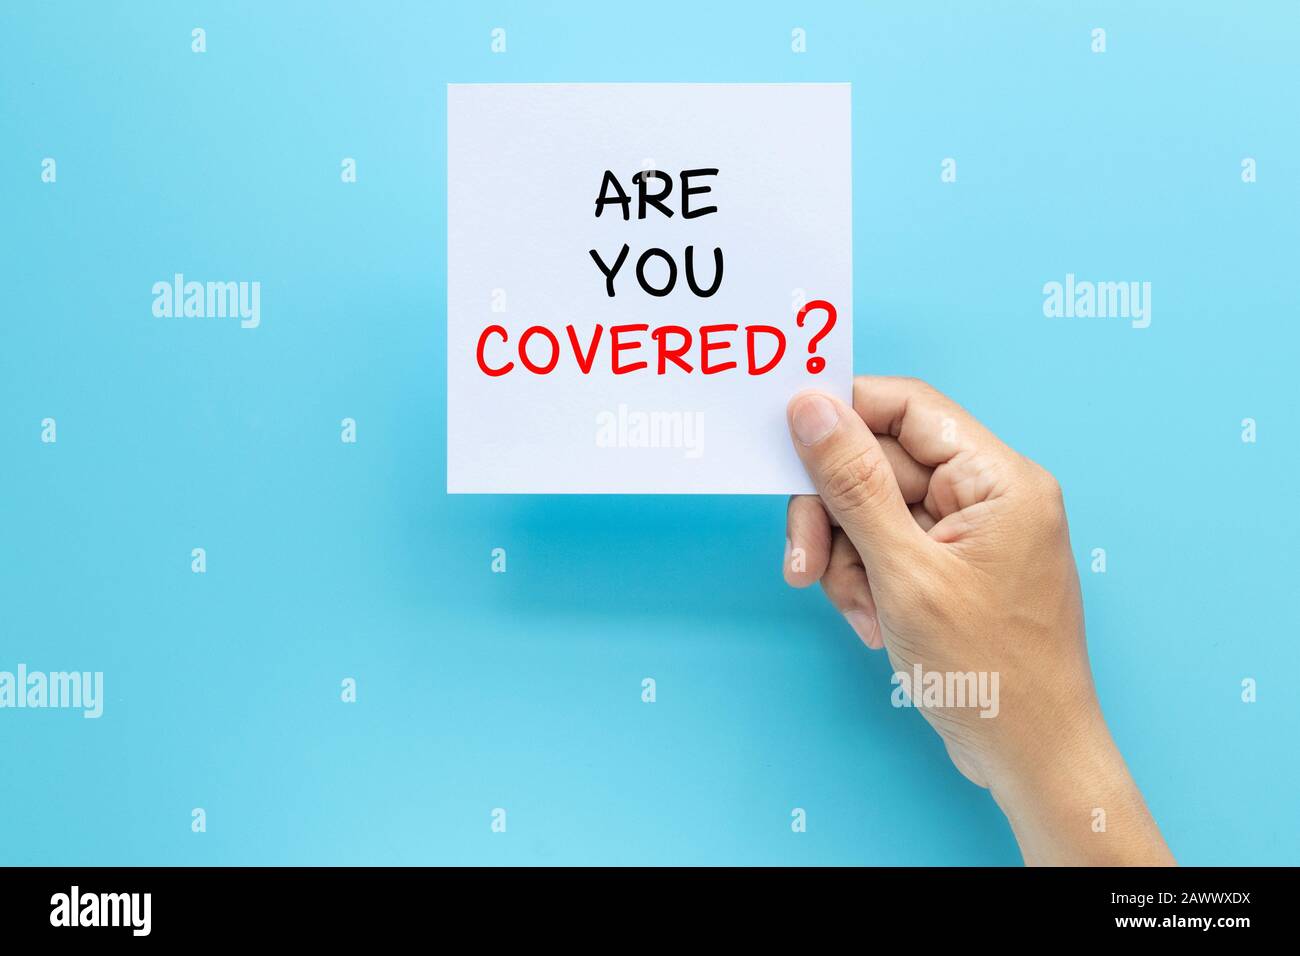 hand holding paper with question ARE YOU COVERED? isolated on blue background with copy space. travel insurance concept Stock Photo